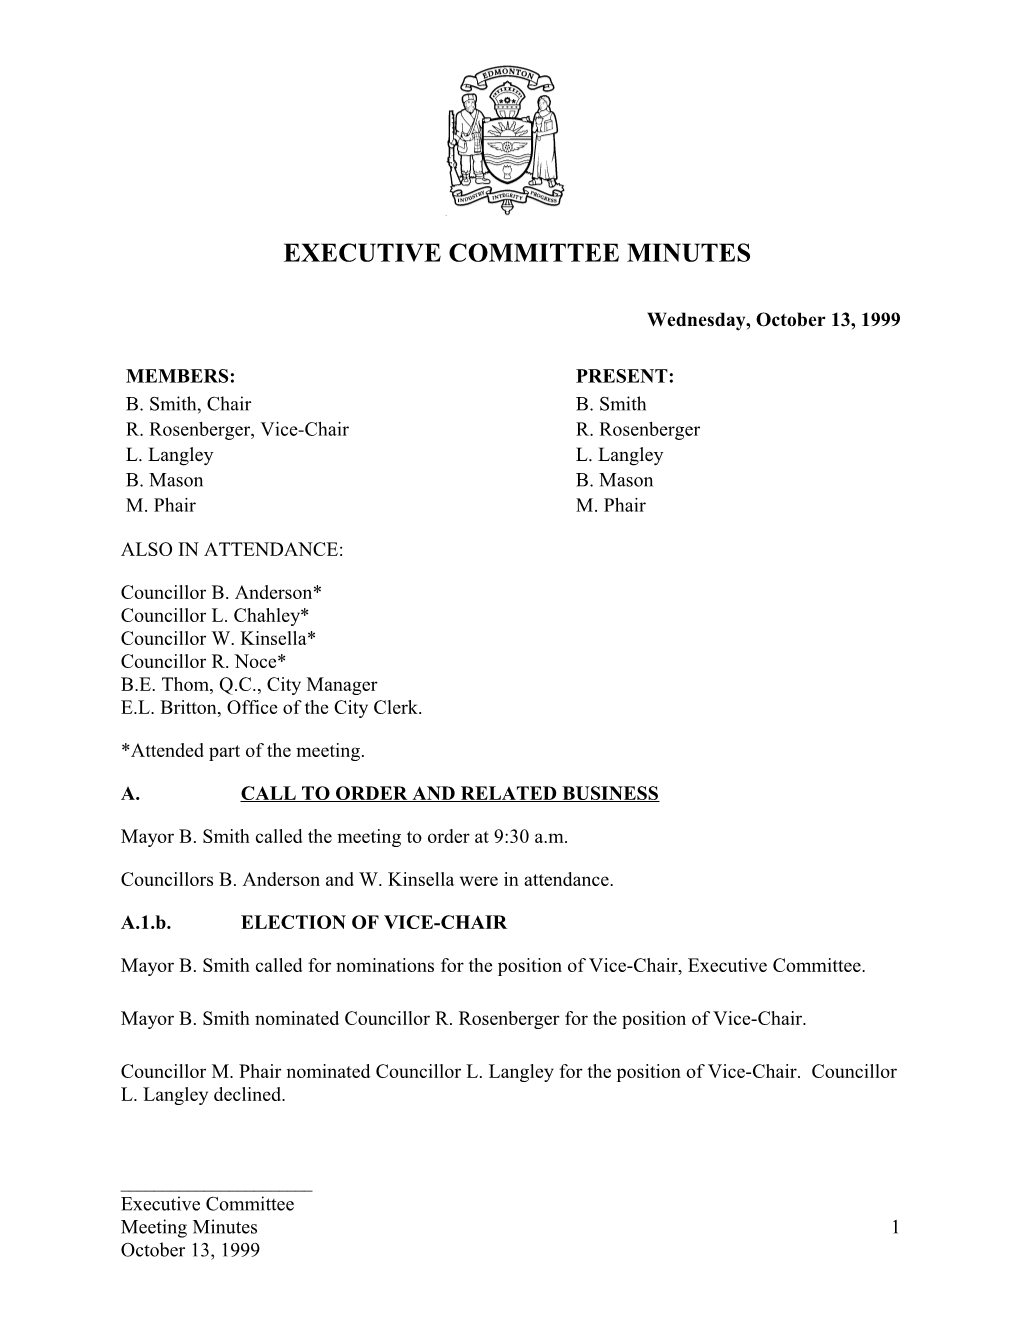 Minutes for Executive Committee October 13, 1999 Meeting